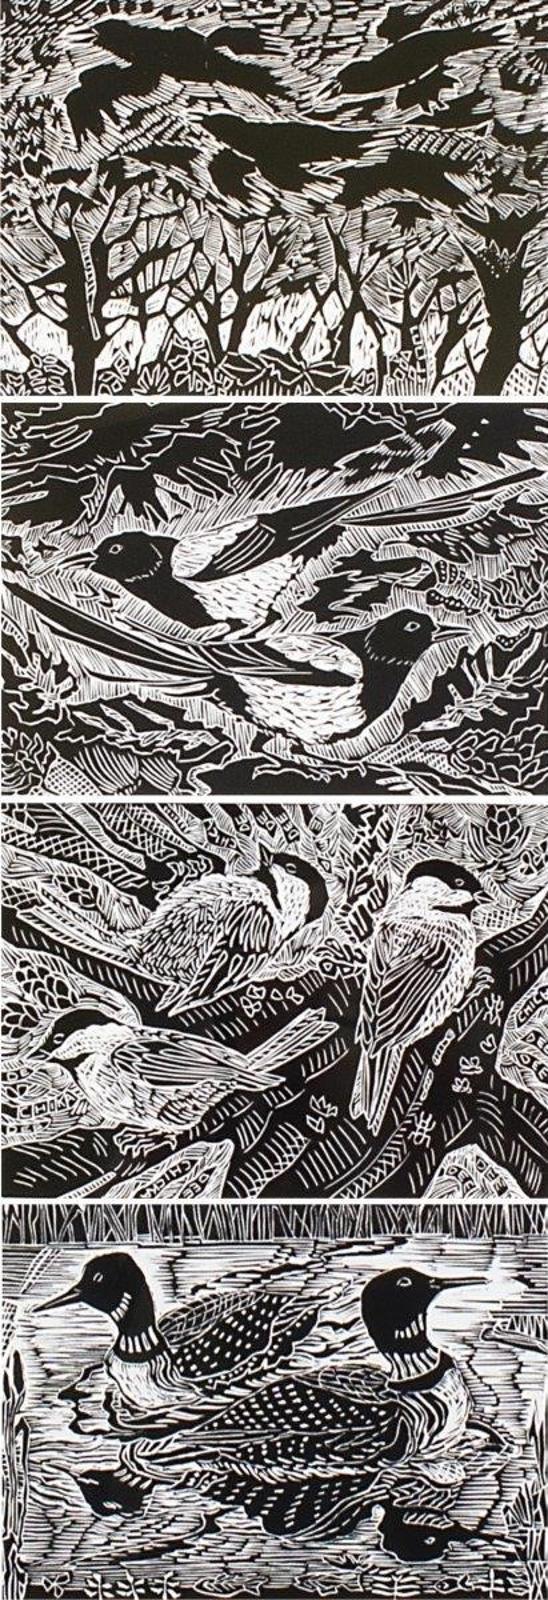 Dora Helen Mackie (1926) - Crows / Magpies / Chickadees / Loons; 1988